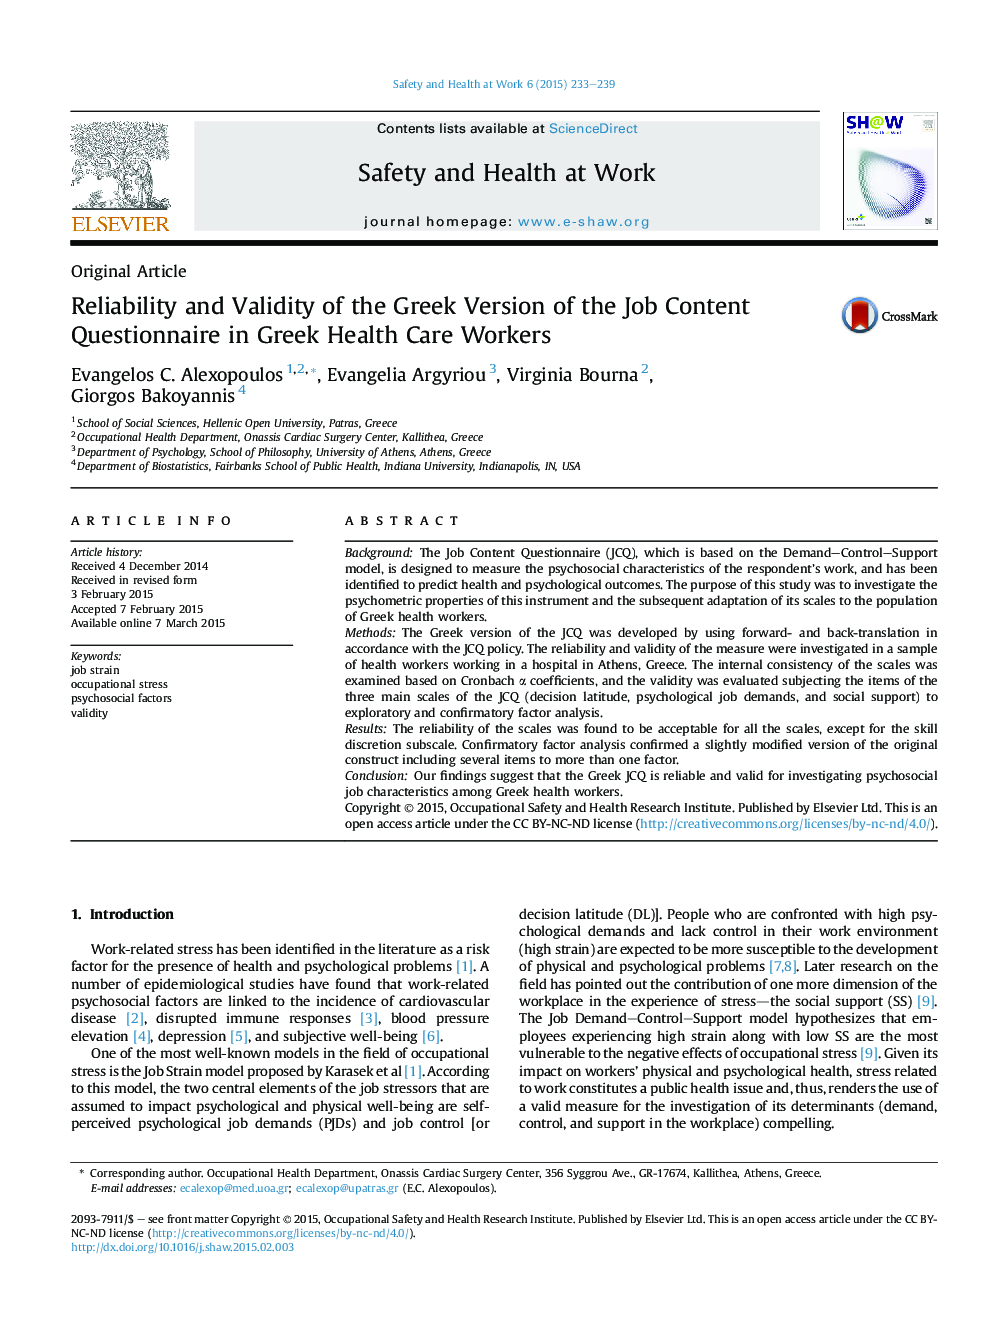 Reliability and Validity of the Greek Version of the Job Content Questionnaire in Greek Health Care Workers